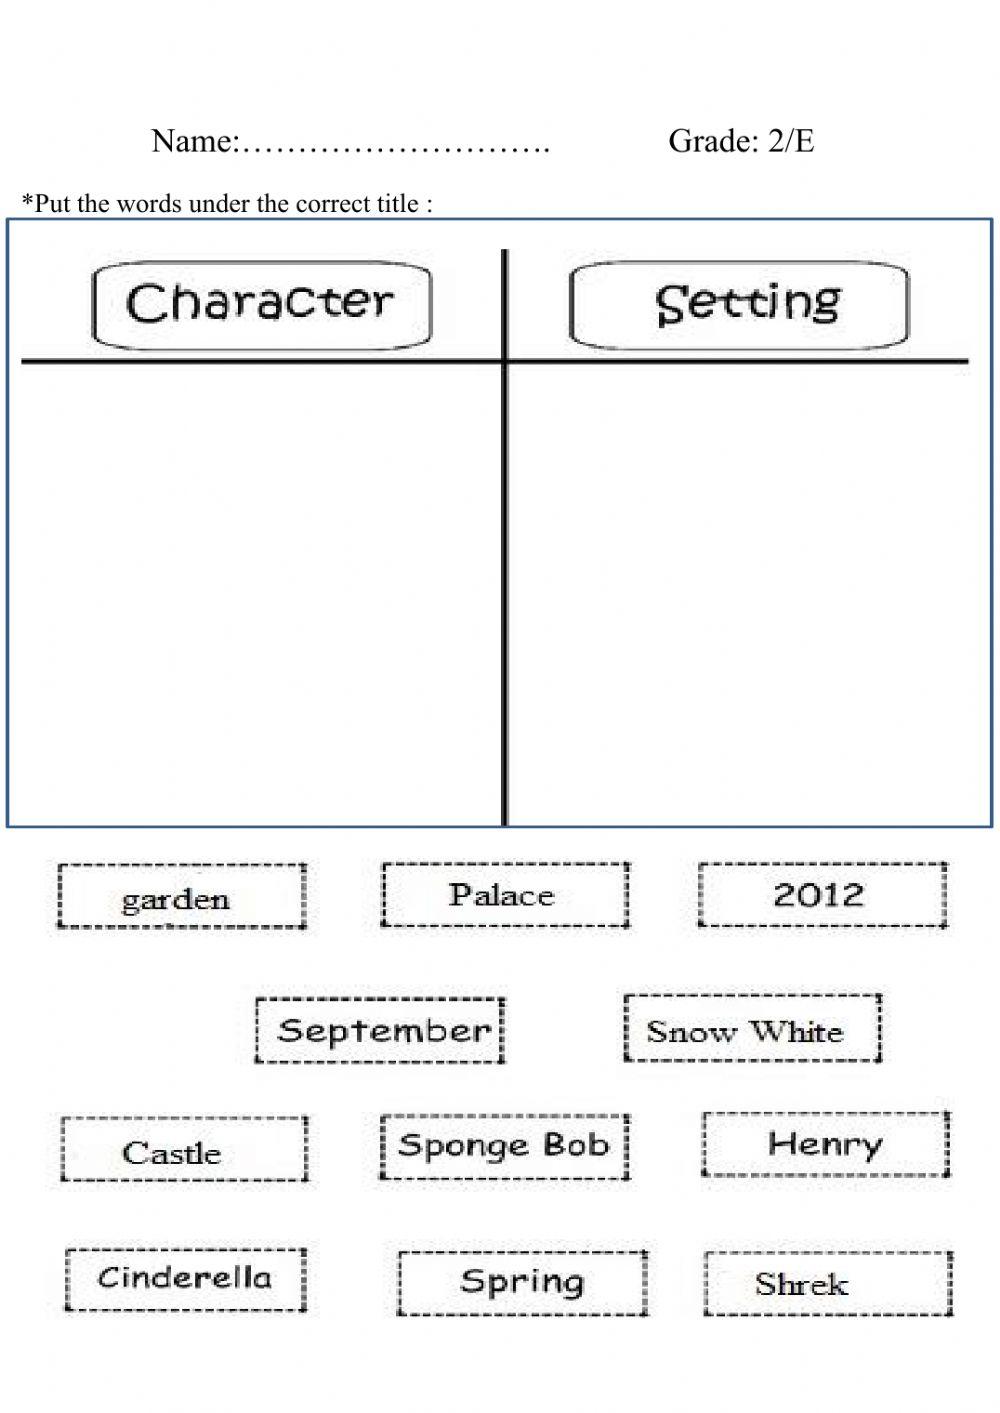 Characters and Setting